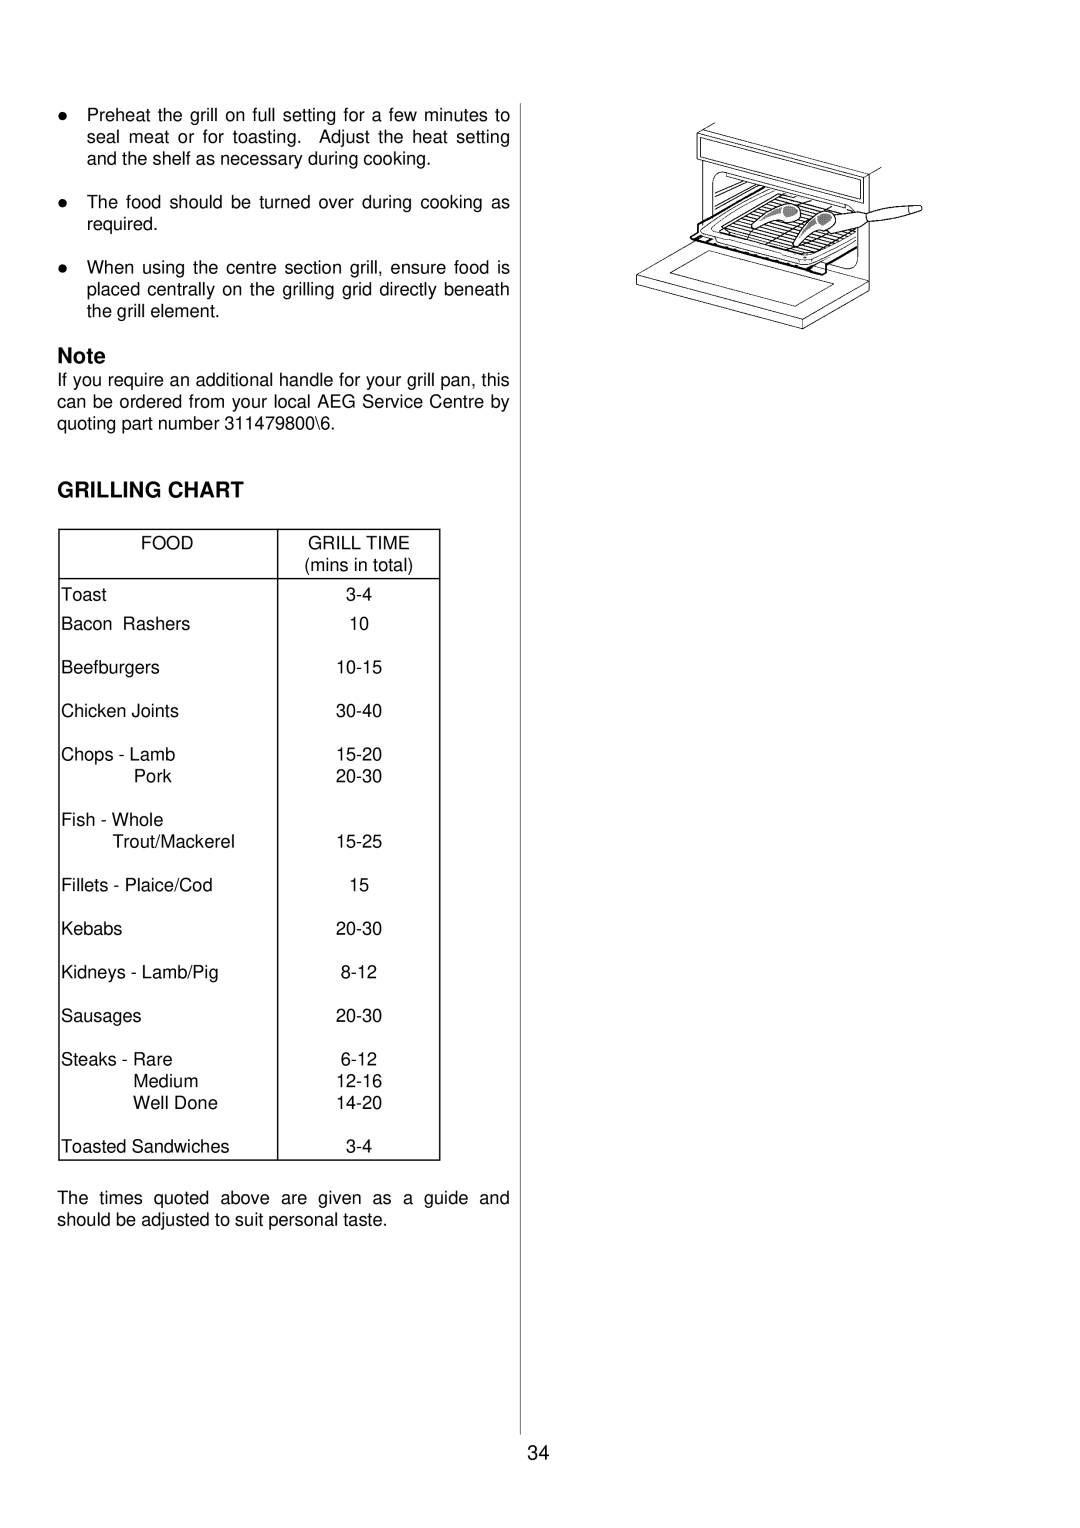 Electrolux D81000, D81005 installation instructions Grilling Chart 